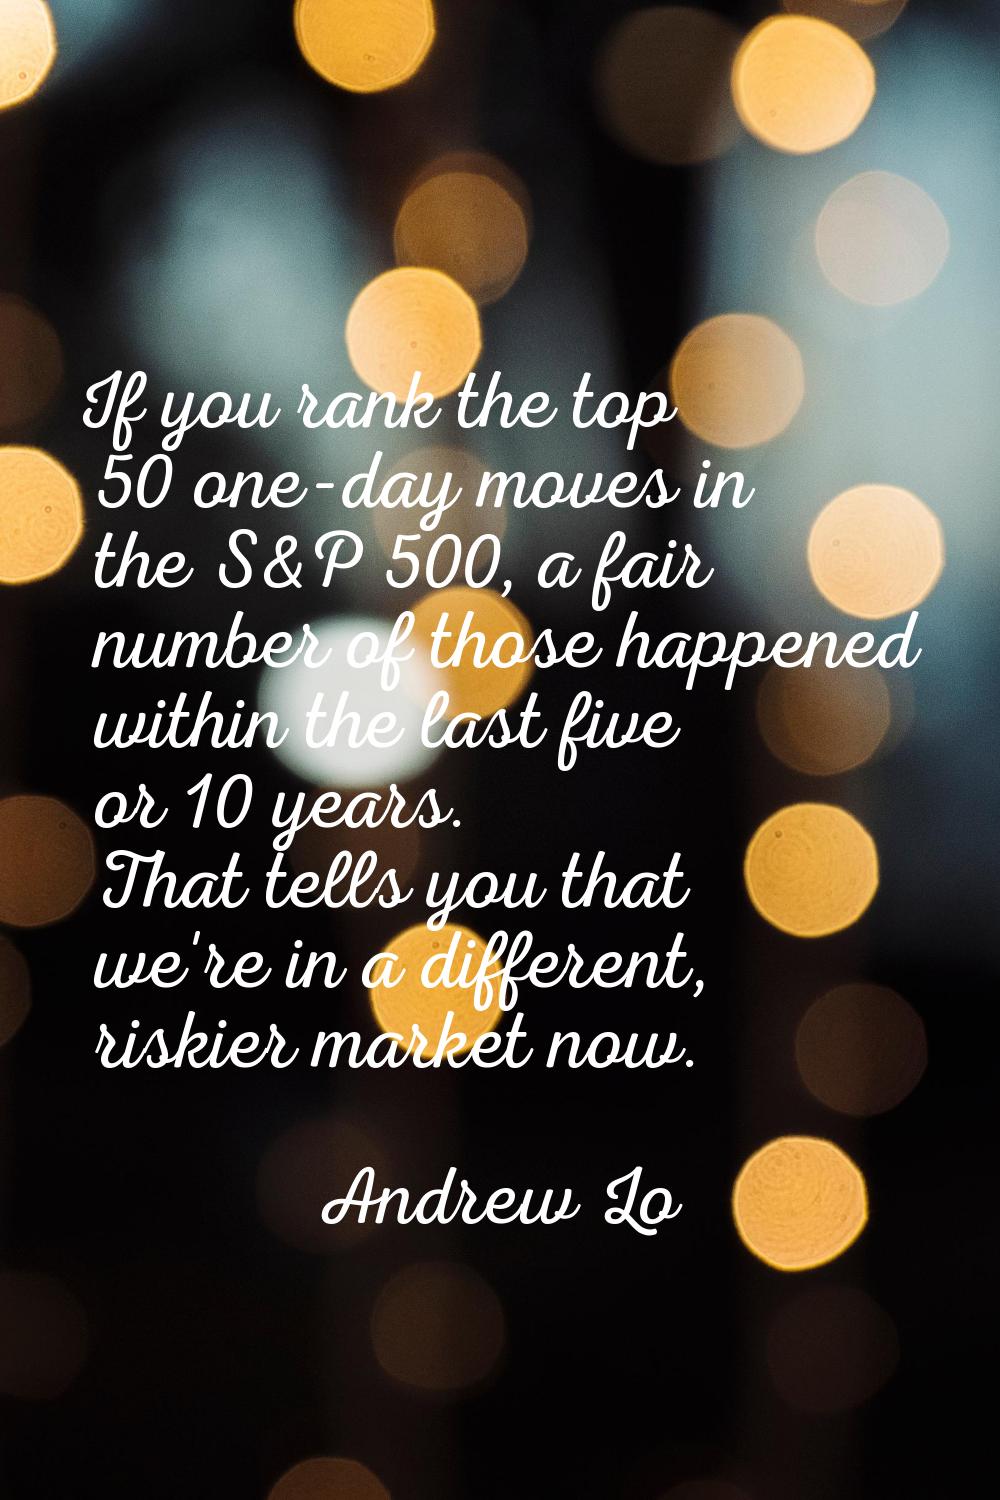 If you rank the top 50 one-day moves in the S&P 500, a fair number of those happened within the las